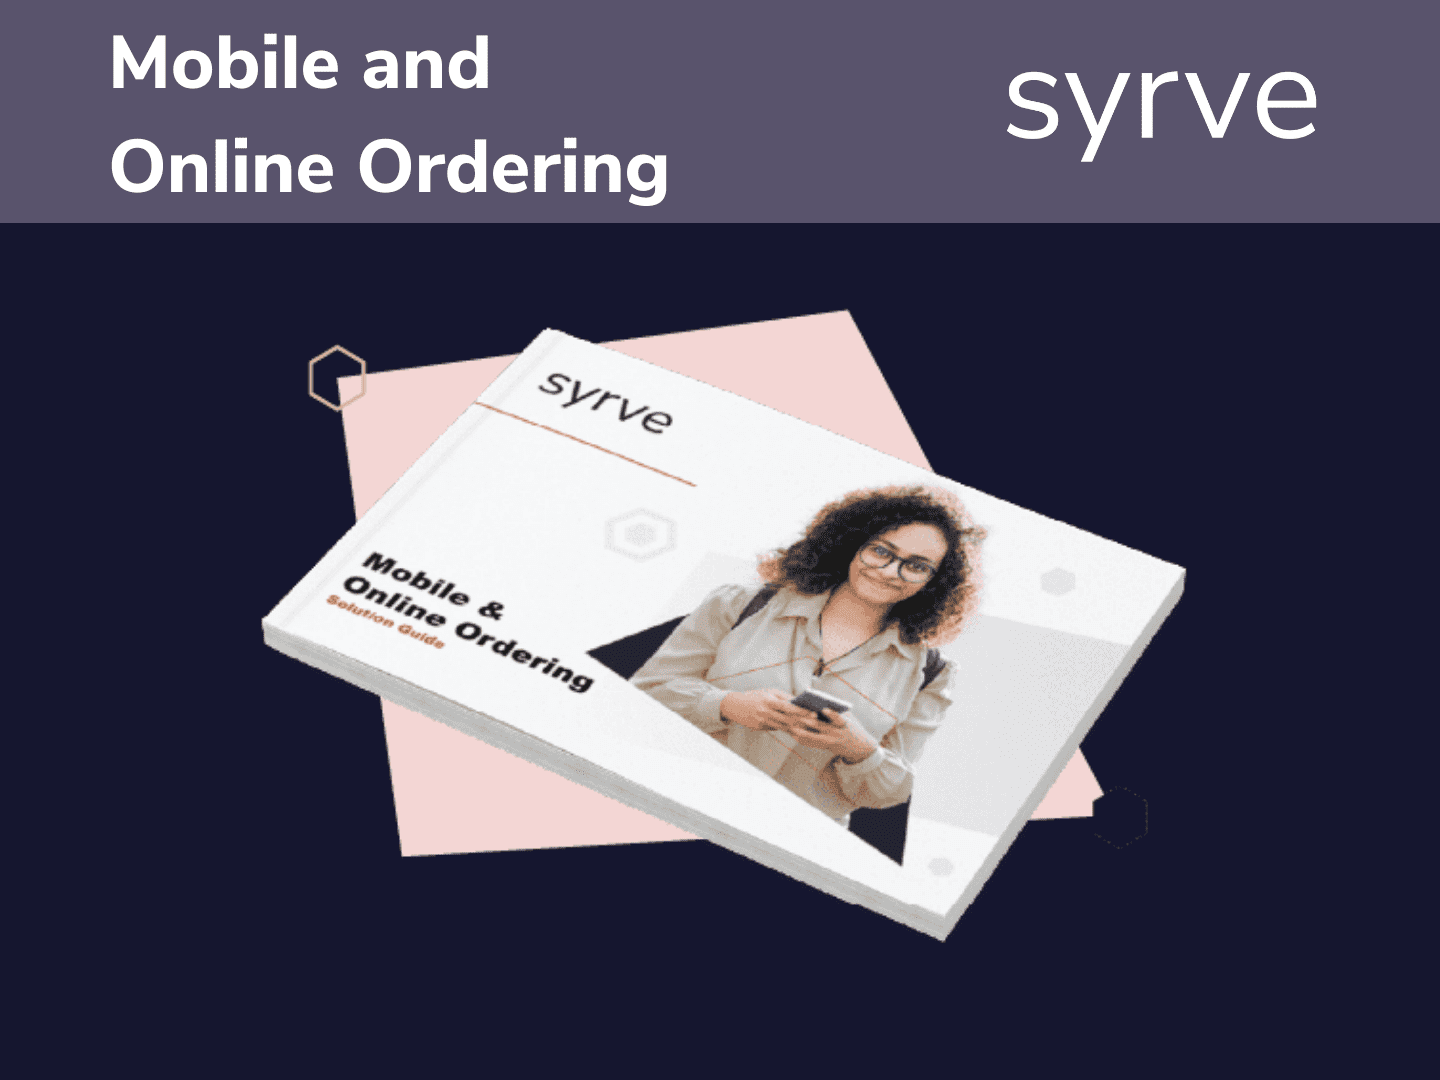 Mobile and Online ordering